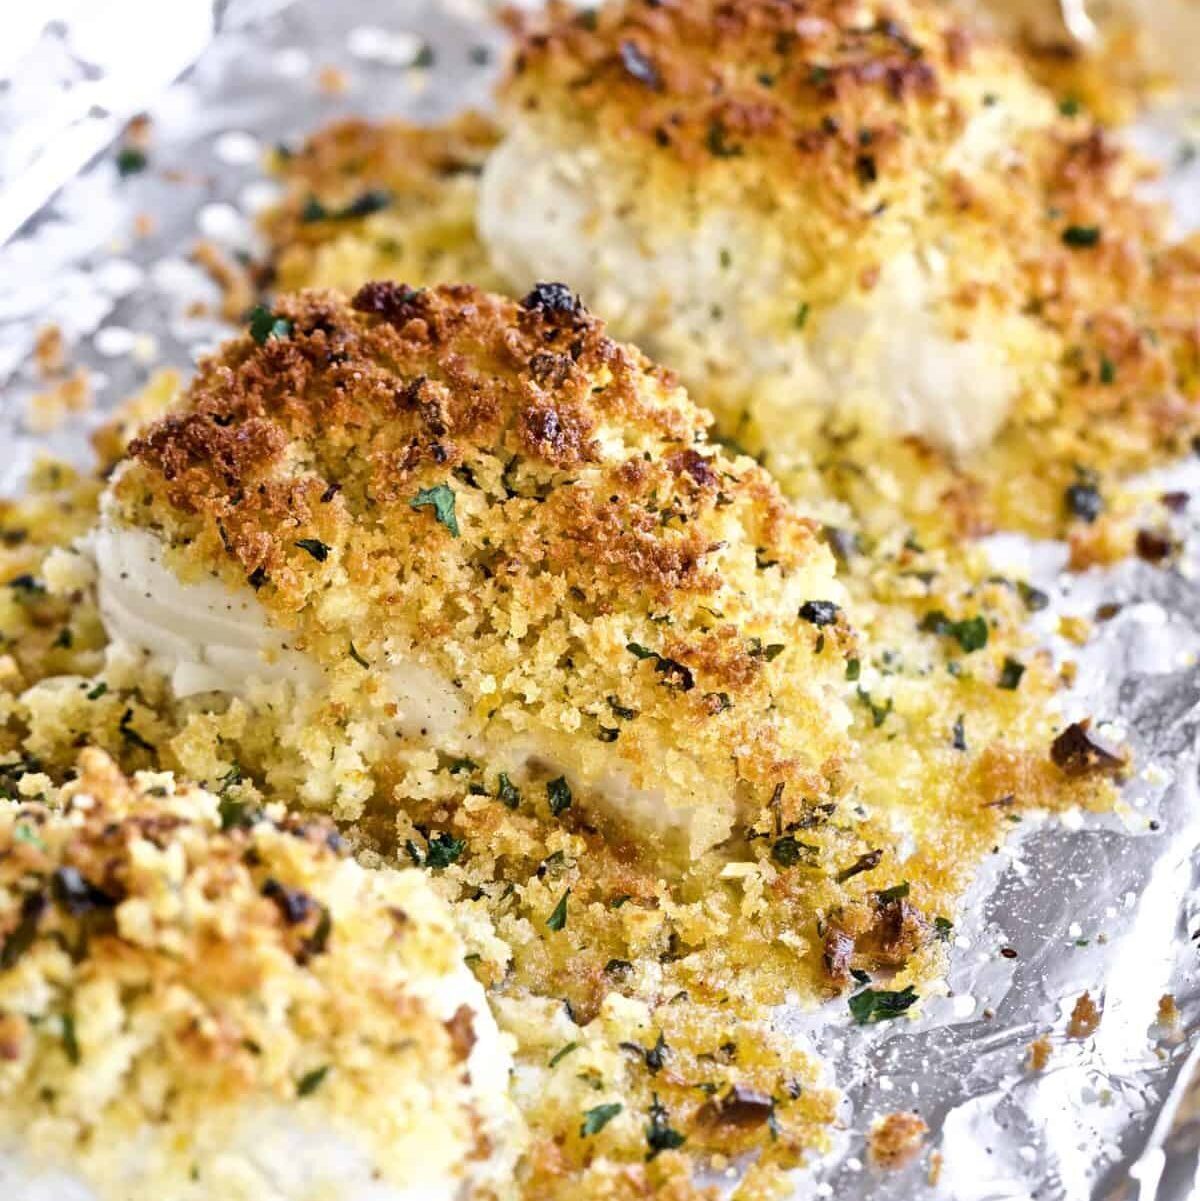 Crispy Baked Cod with Panko Recipe on a sheet pan lined with foil